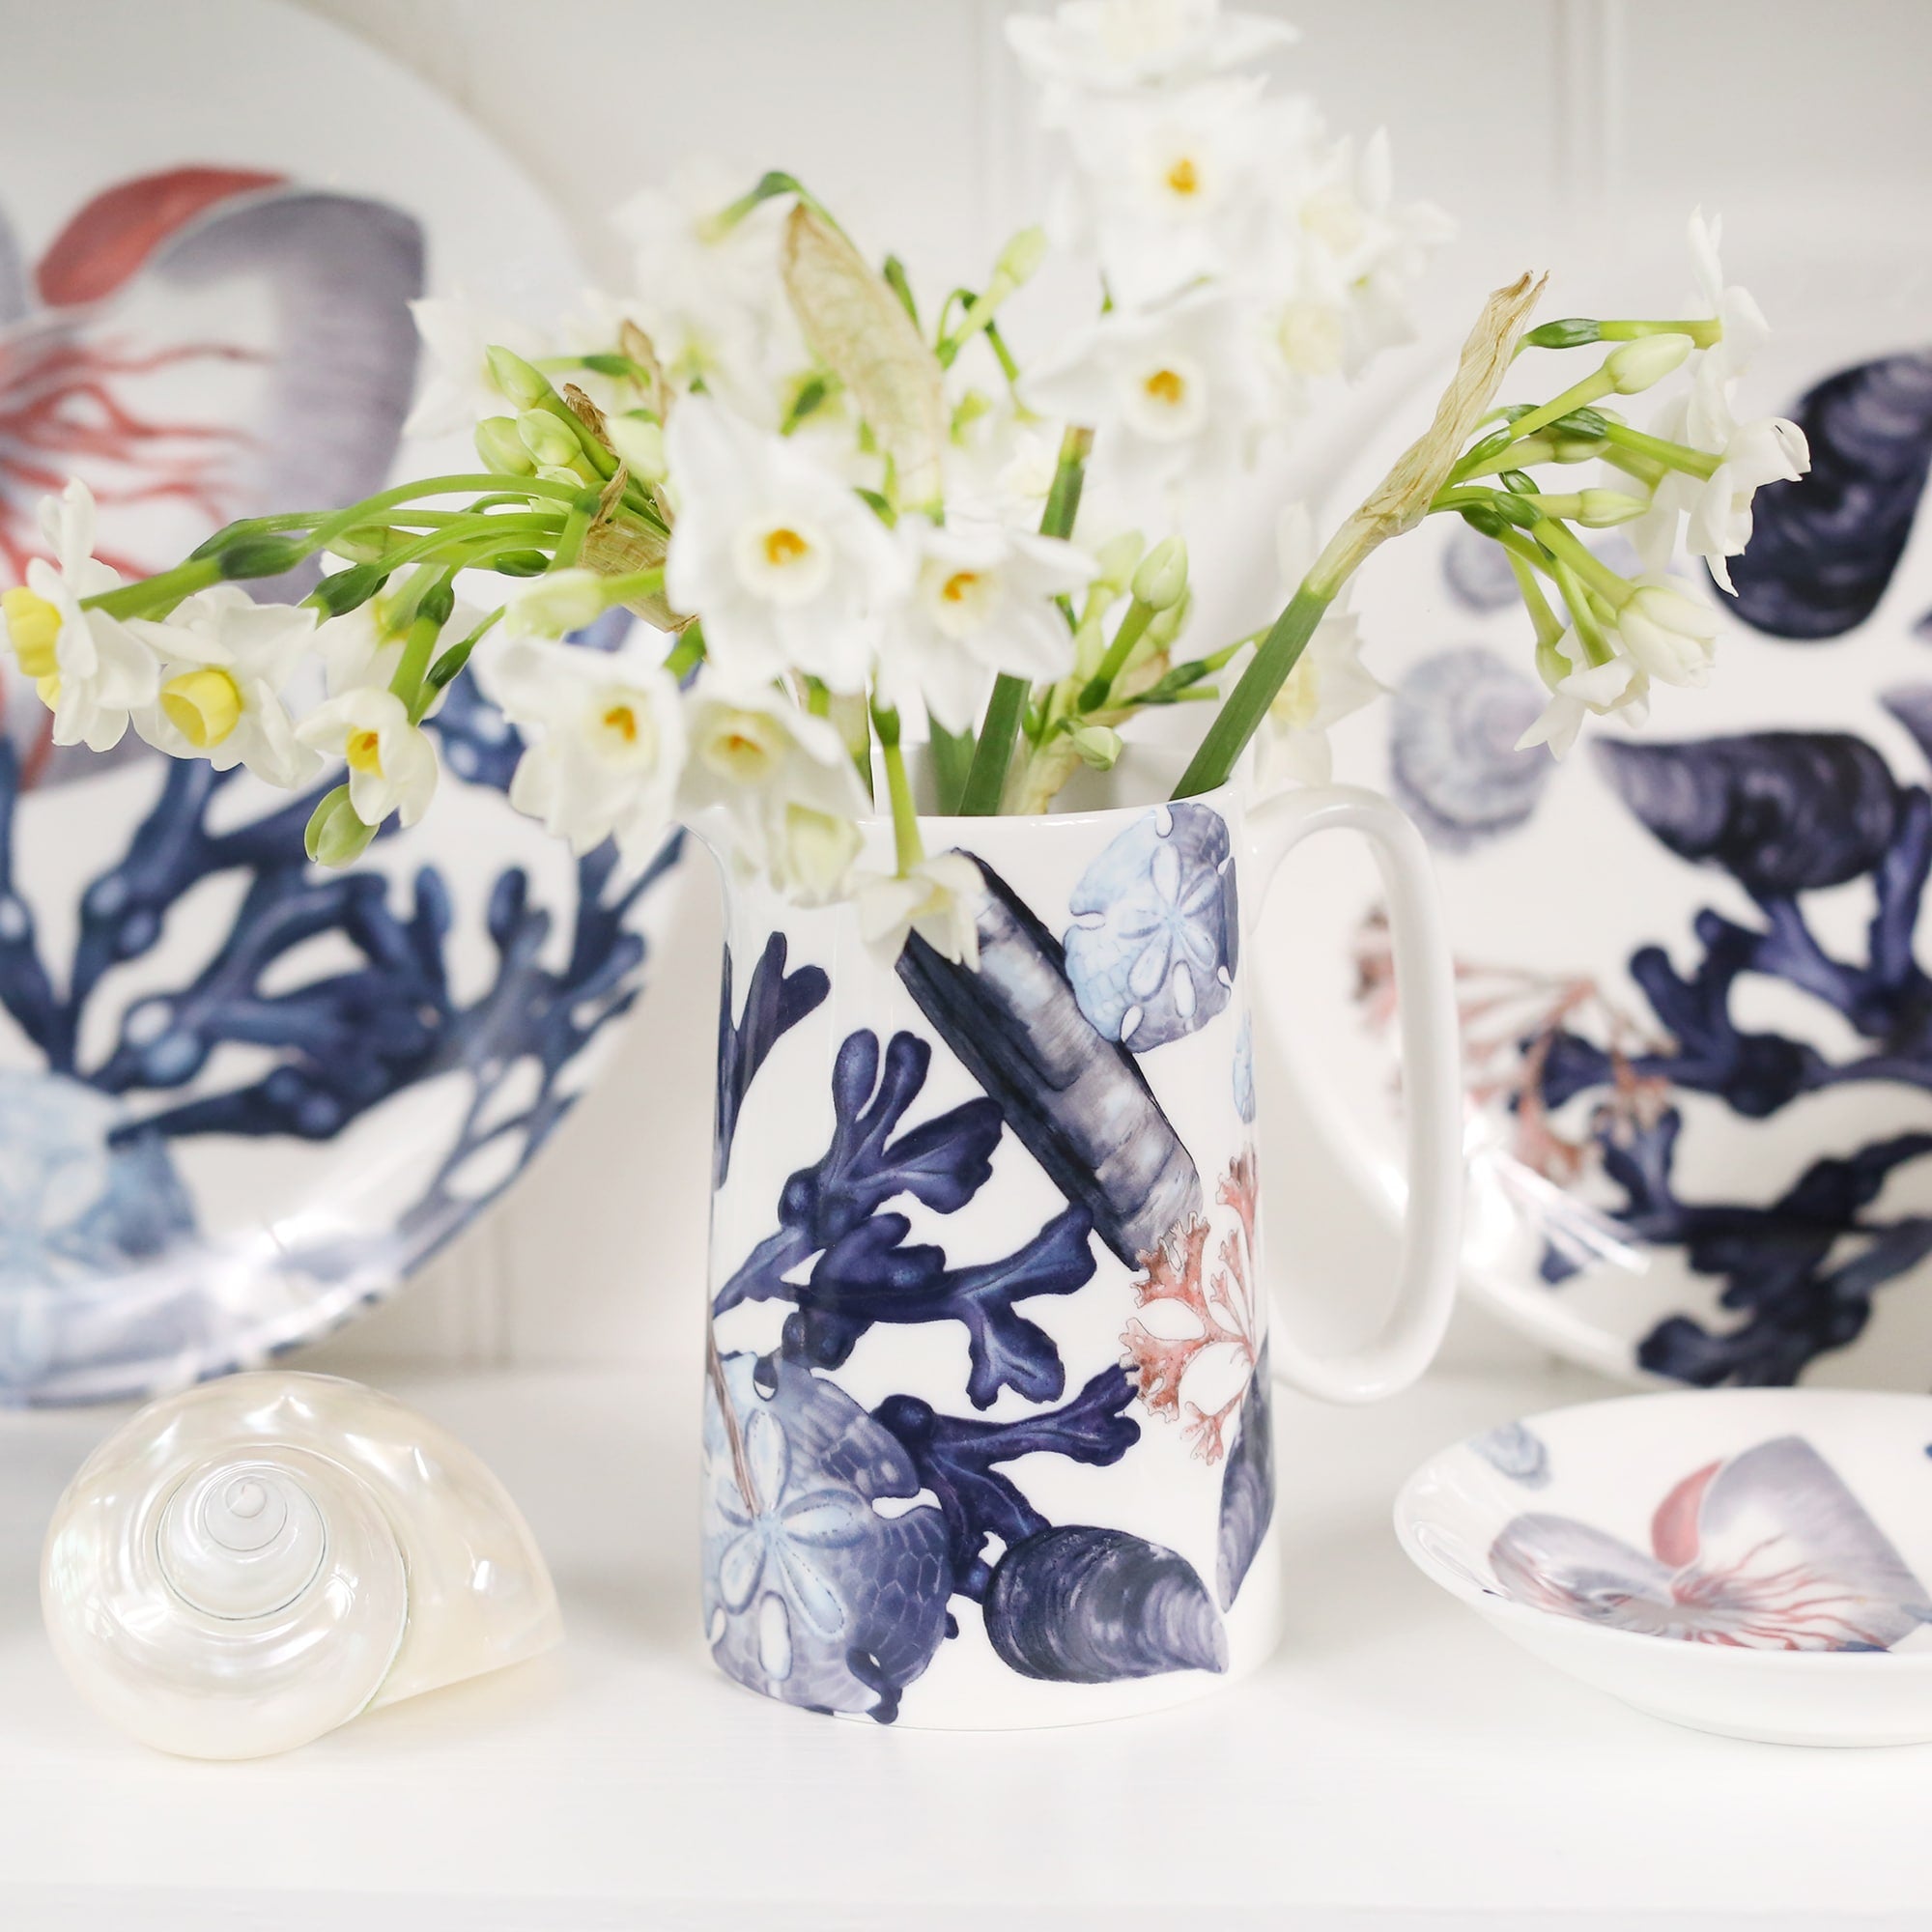 Medium size beachcomber jug showing shades of blue shells, seaweed and a starfish.In the jug are daffodils, in the background are matching beachcomber china